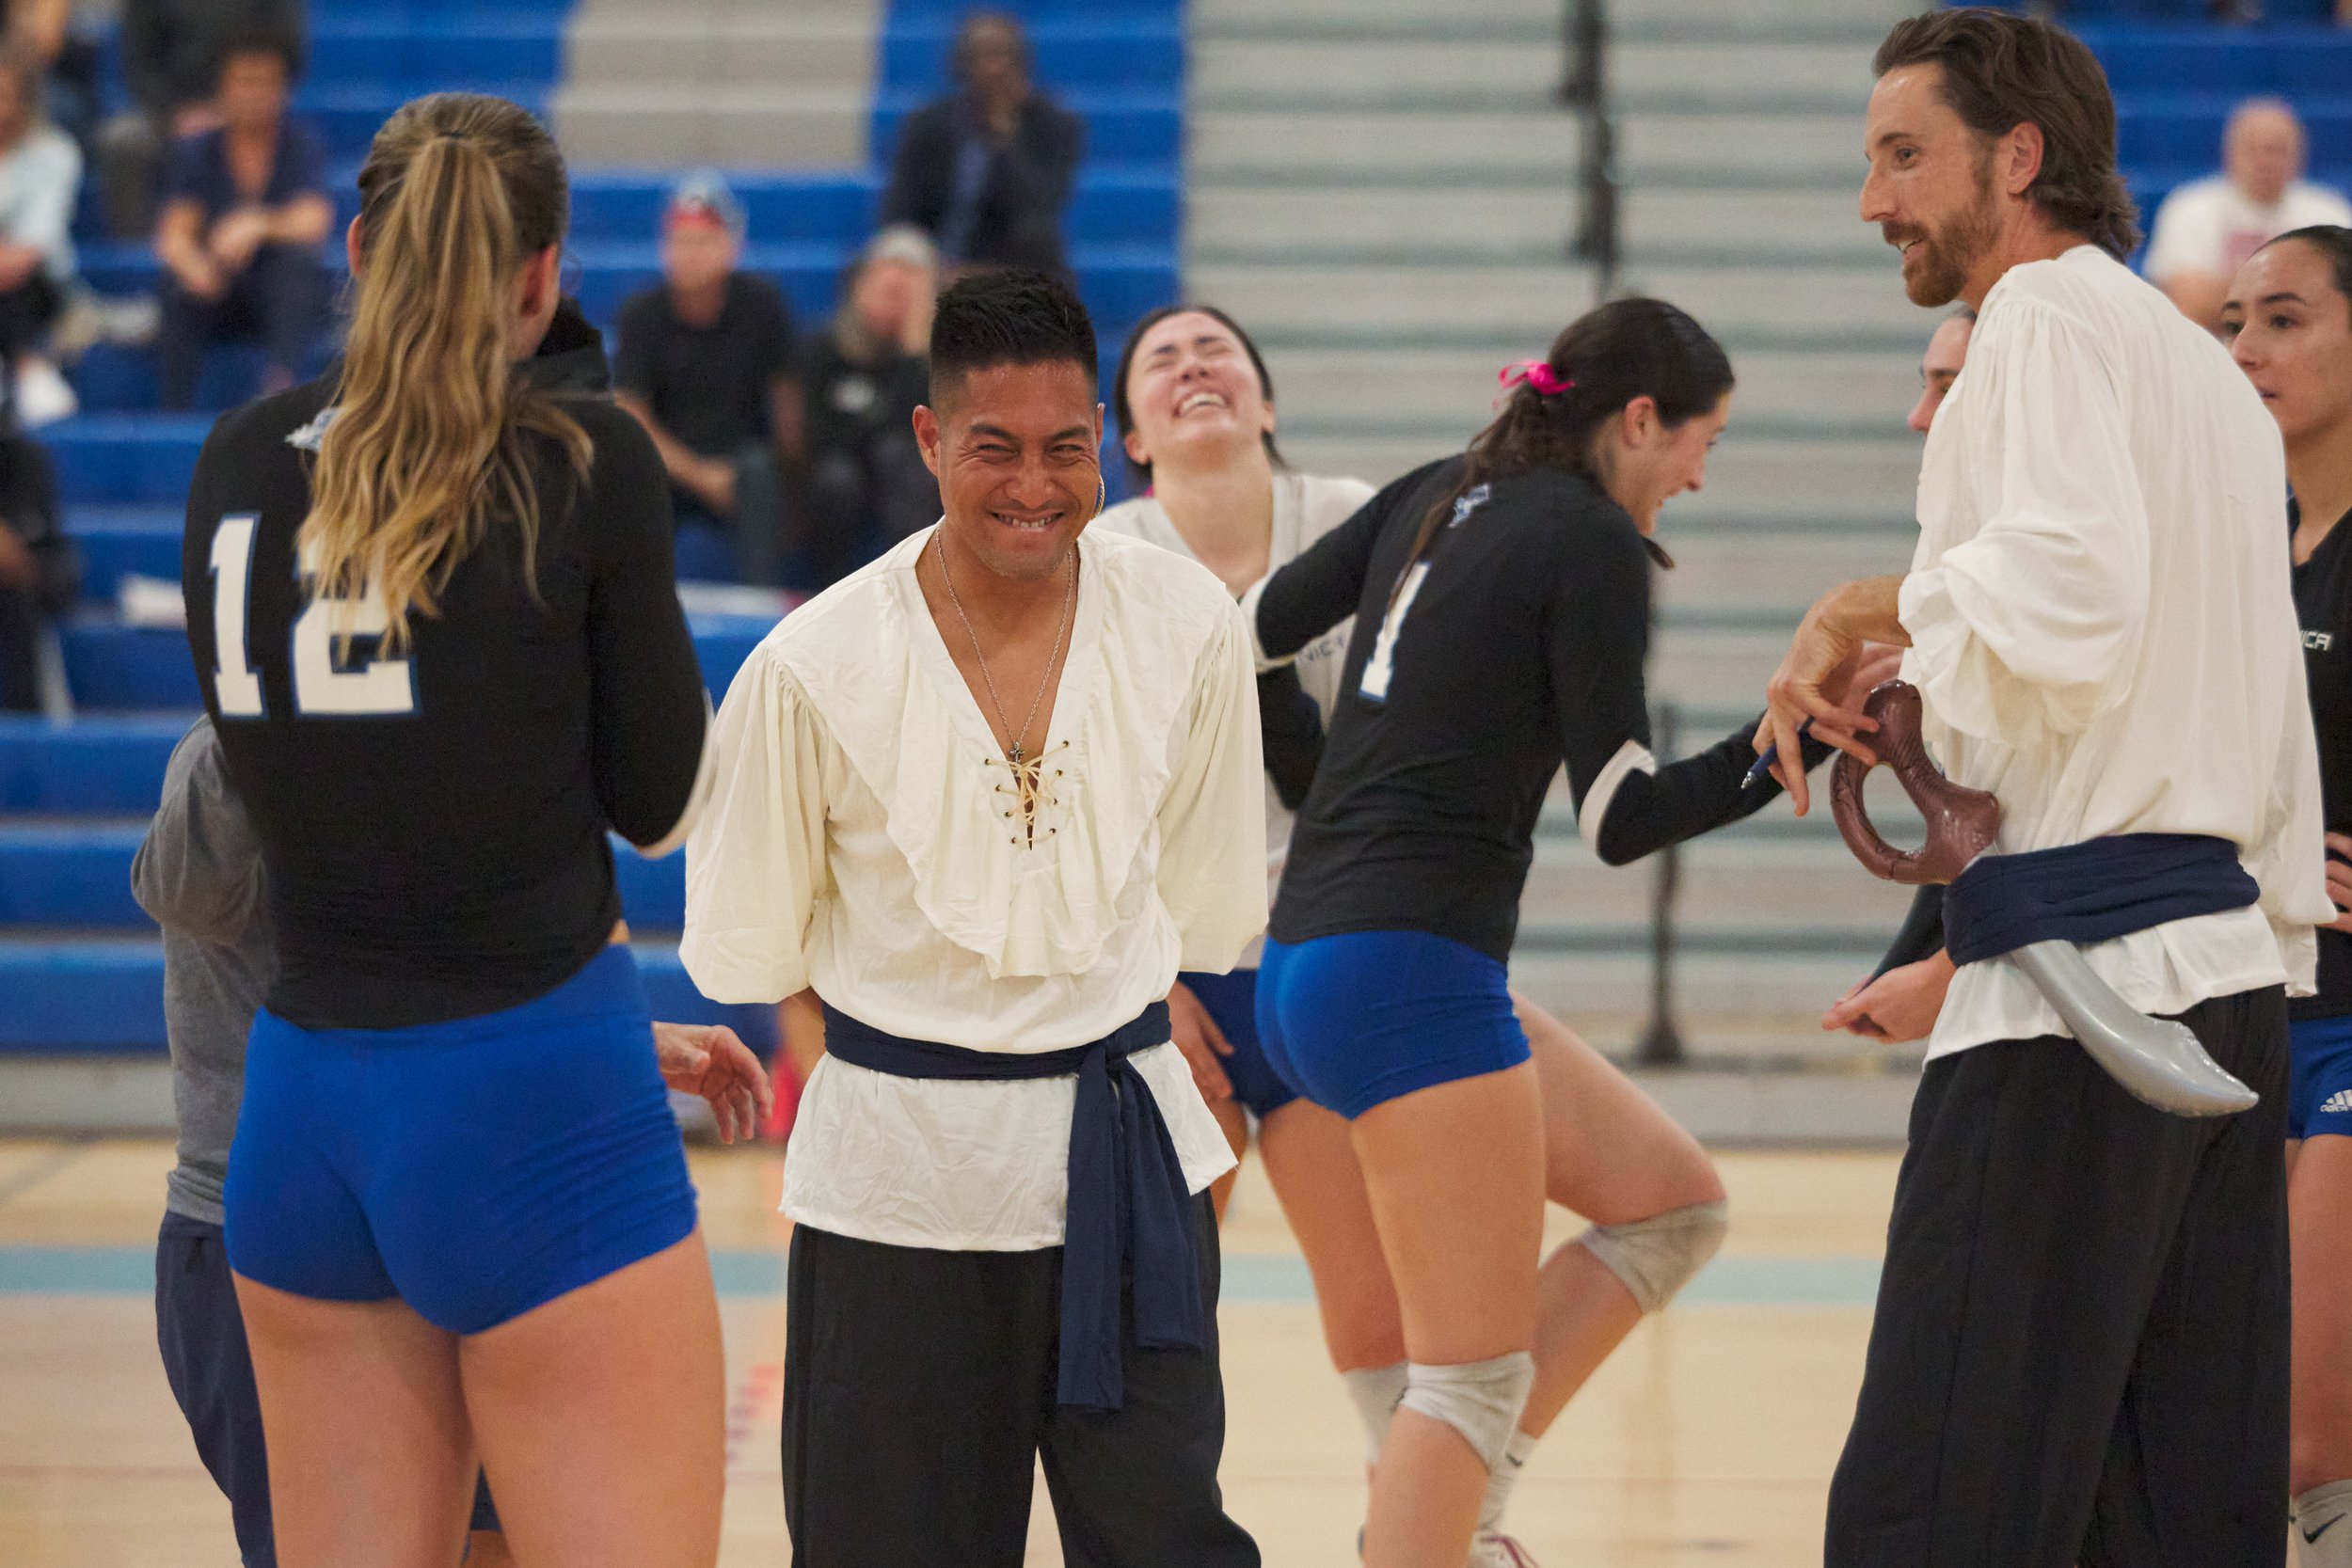  Santa Monica College Corsairs Women's Volleyball Head Coach Christian Cammayo (center left), next to assistant coach Chris Chown (right), fails to contain his laughter after Mia Paulson (left) got smacked in the face with the ball during the match a